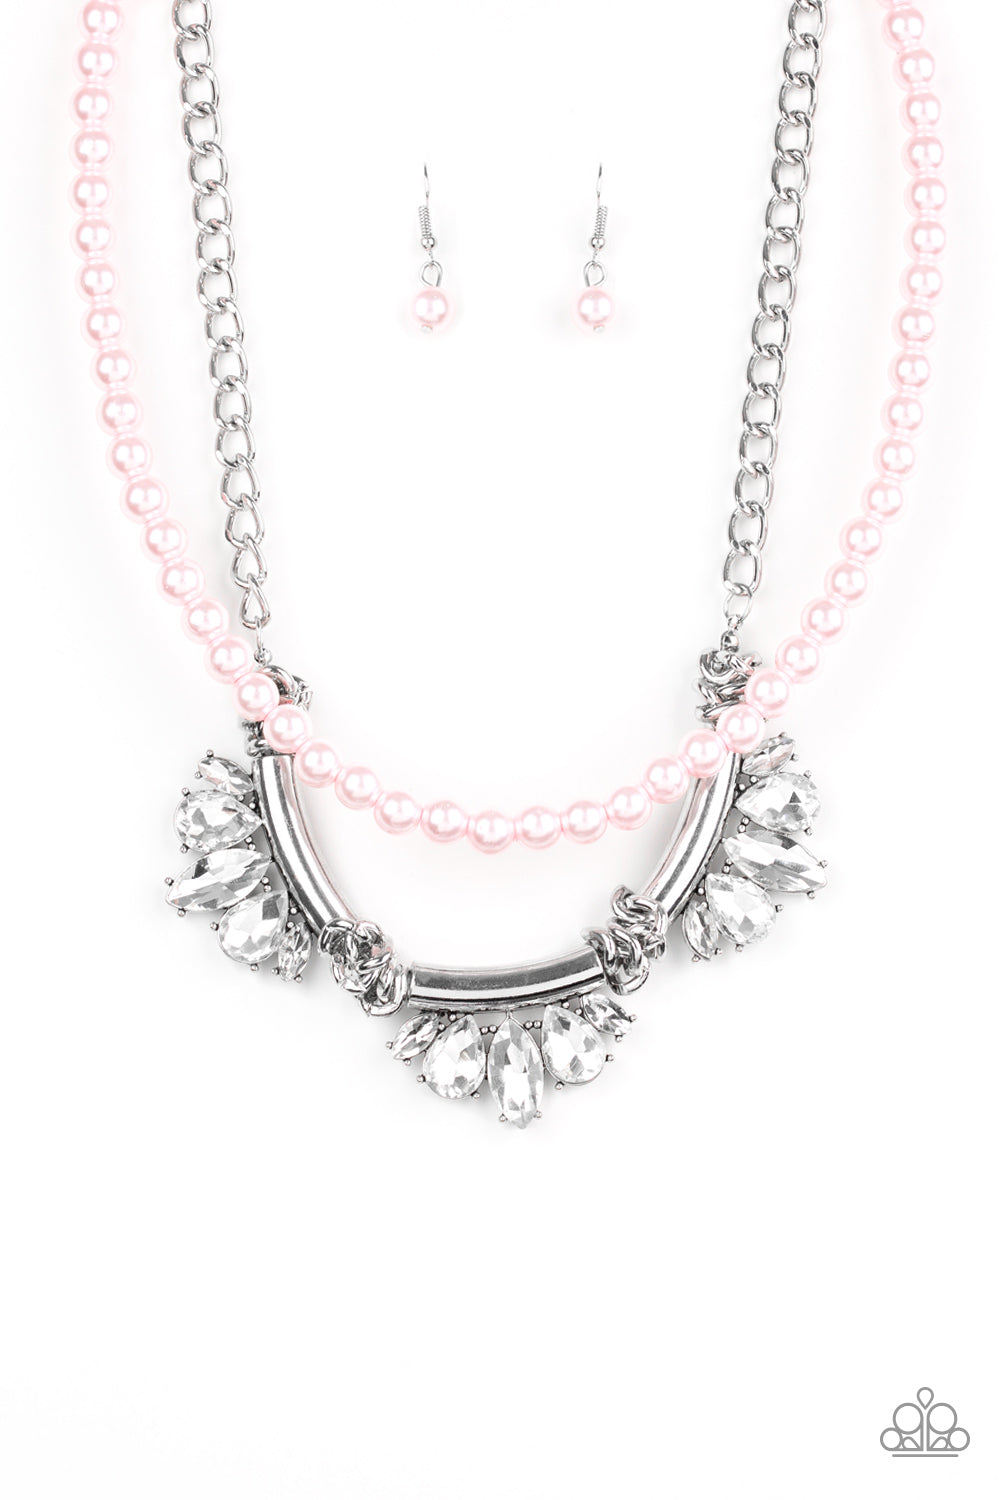 Bow Before The Queen - Pink - Classy Elite Jewelry